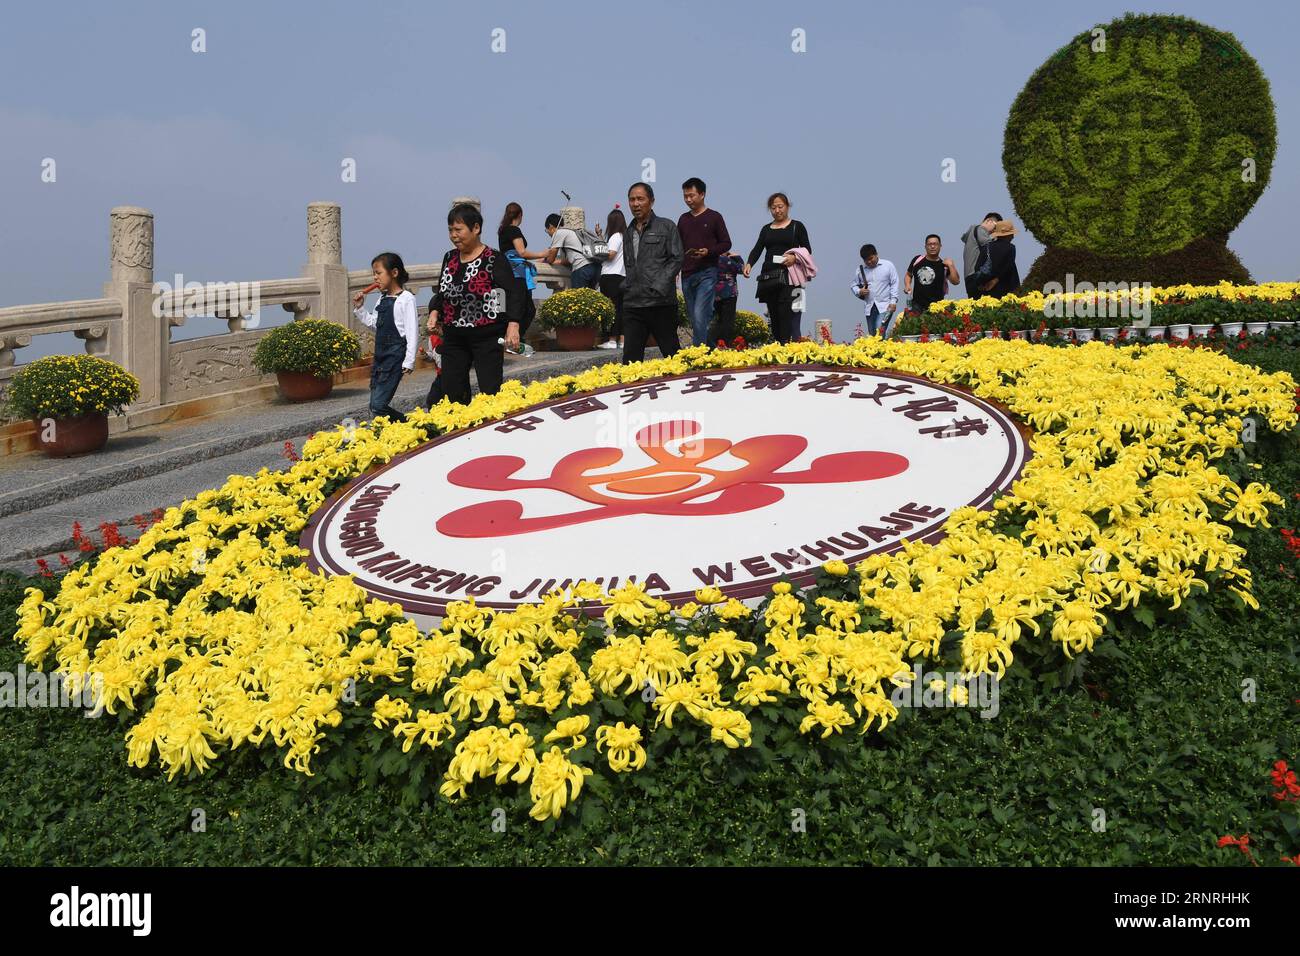 (171002) -- ZHENGZHOU, Oct. 2, 2017 -- Visitors view chrysanthemums in Kaifeng, central China s Henan Province, Oct. 2, 2017. Over two million pots of chrysanthemum in the city have bloomed recently. ) (wf) CHINA-HENAN-CHRYSANTHEMUM (CN) ZhuxXiang PUBLICATIONxNOTxINxCHN Stock Photo